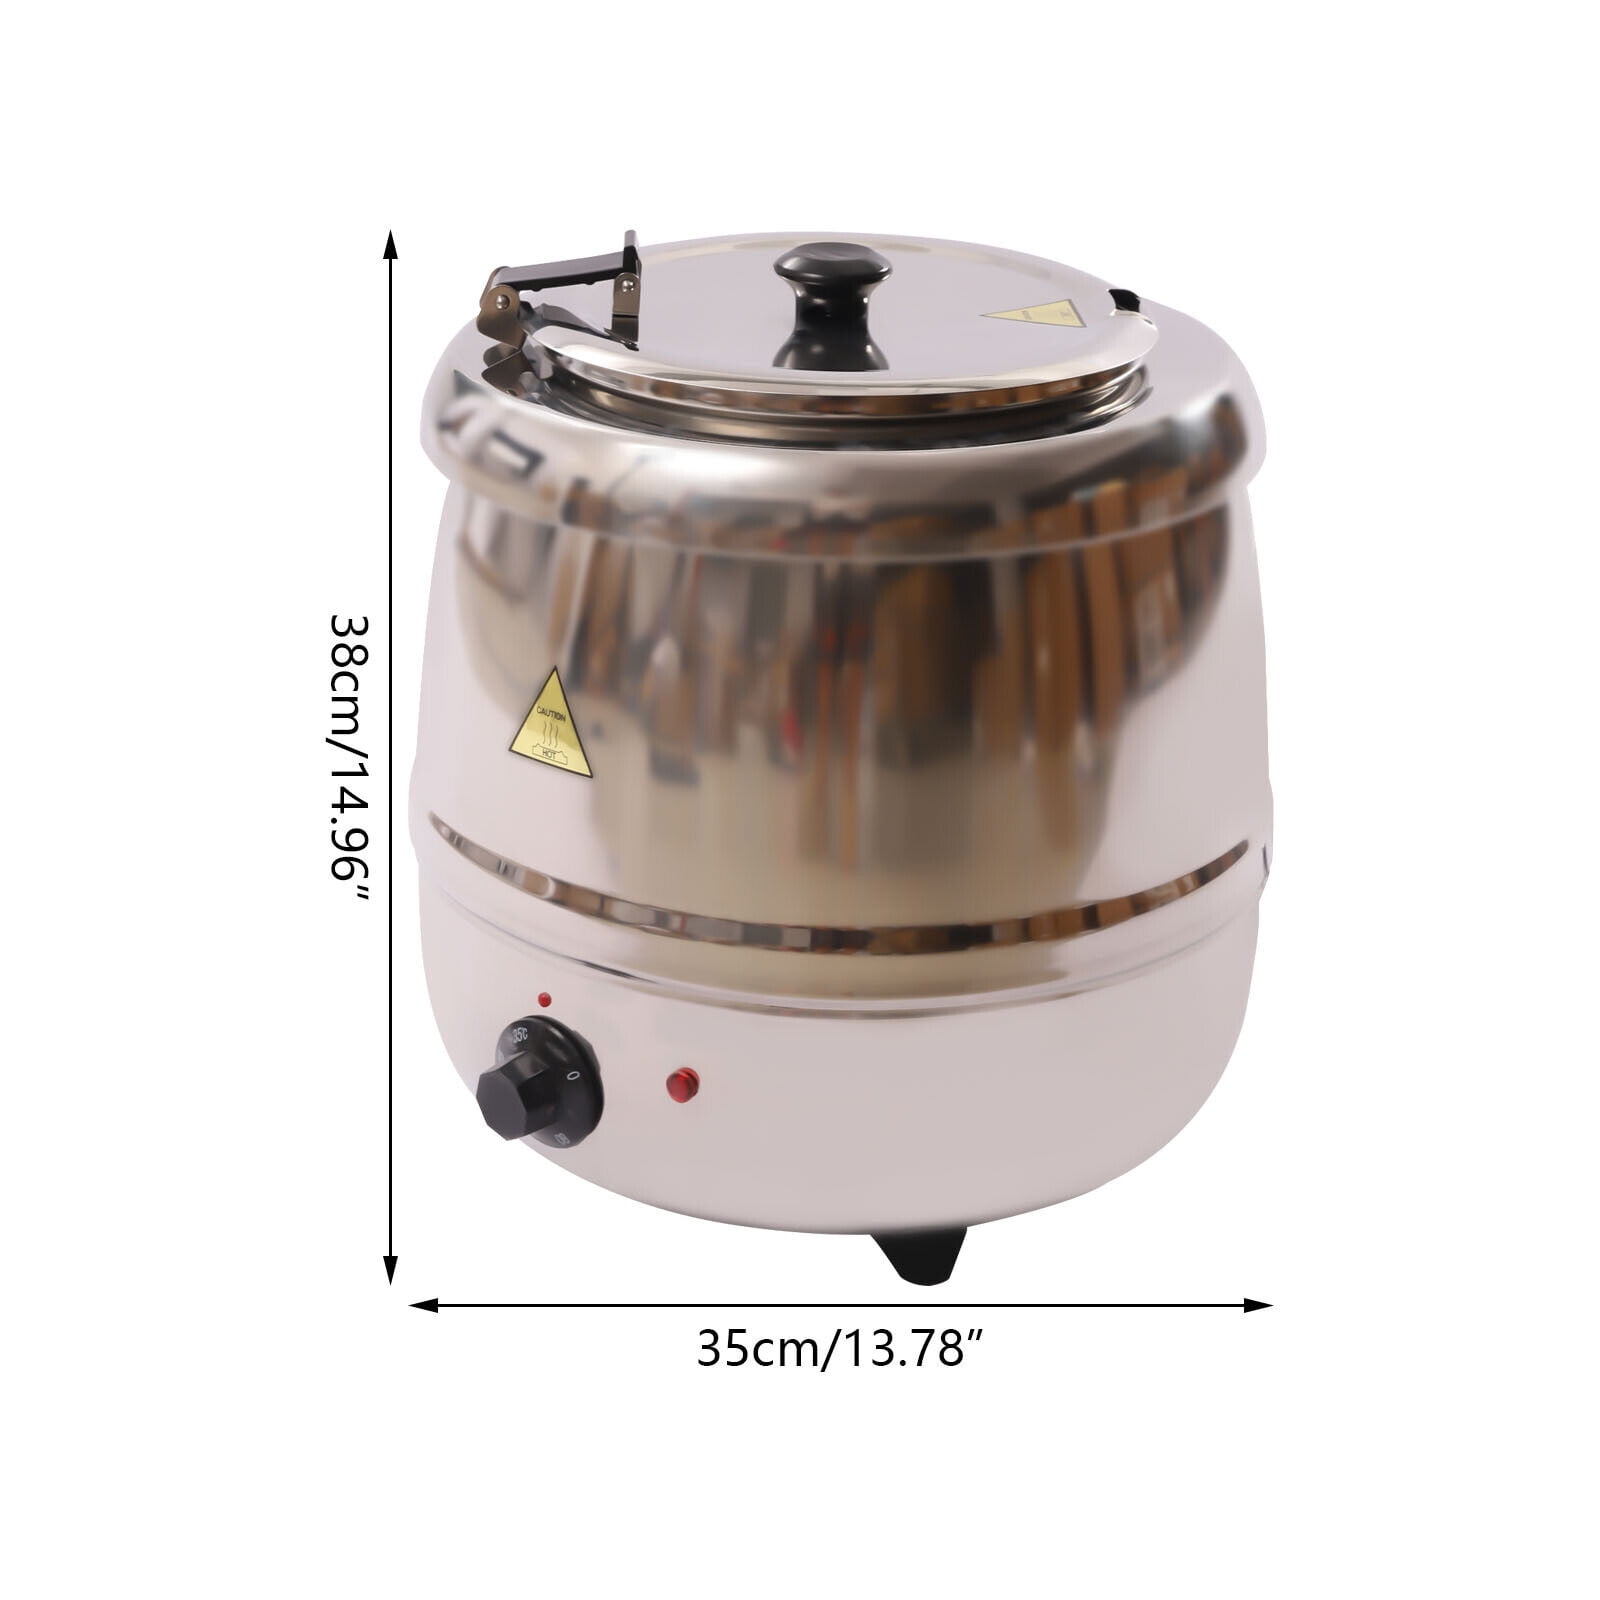 C105 Hot Sale Electric 10L Soup Kettle With Stainless Steel Lid - Buy C105  Hot Sale Electric 10L Soup Kettle With Stainless Steel Lid Product on